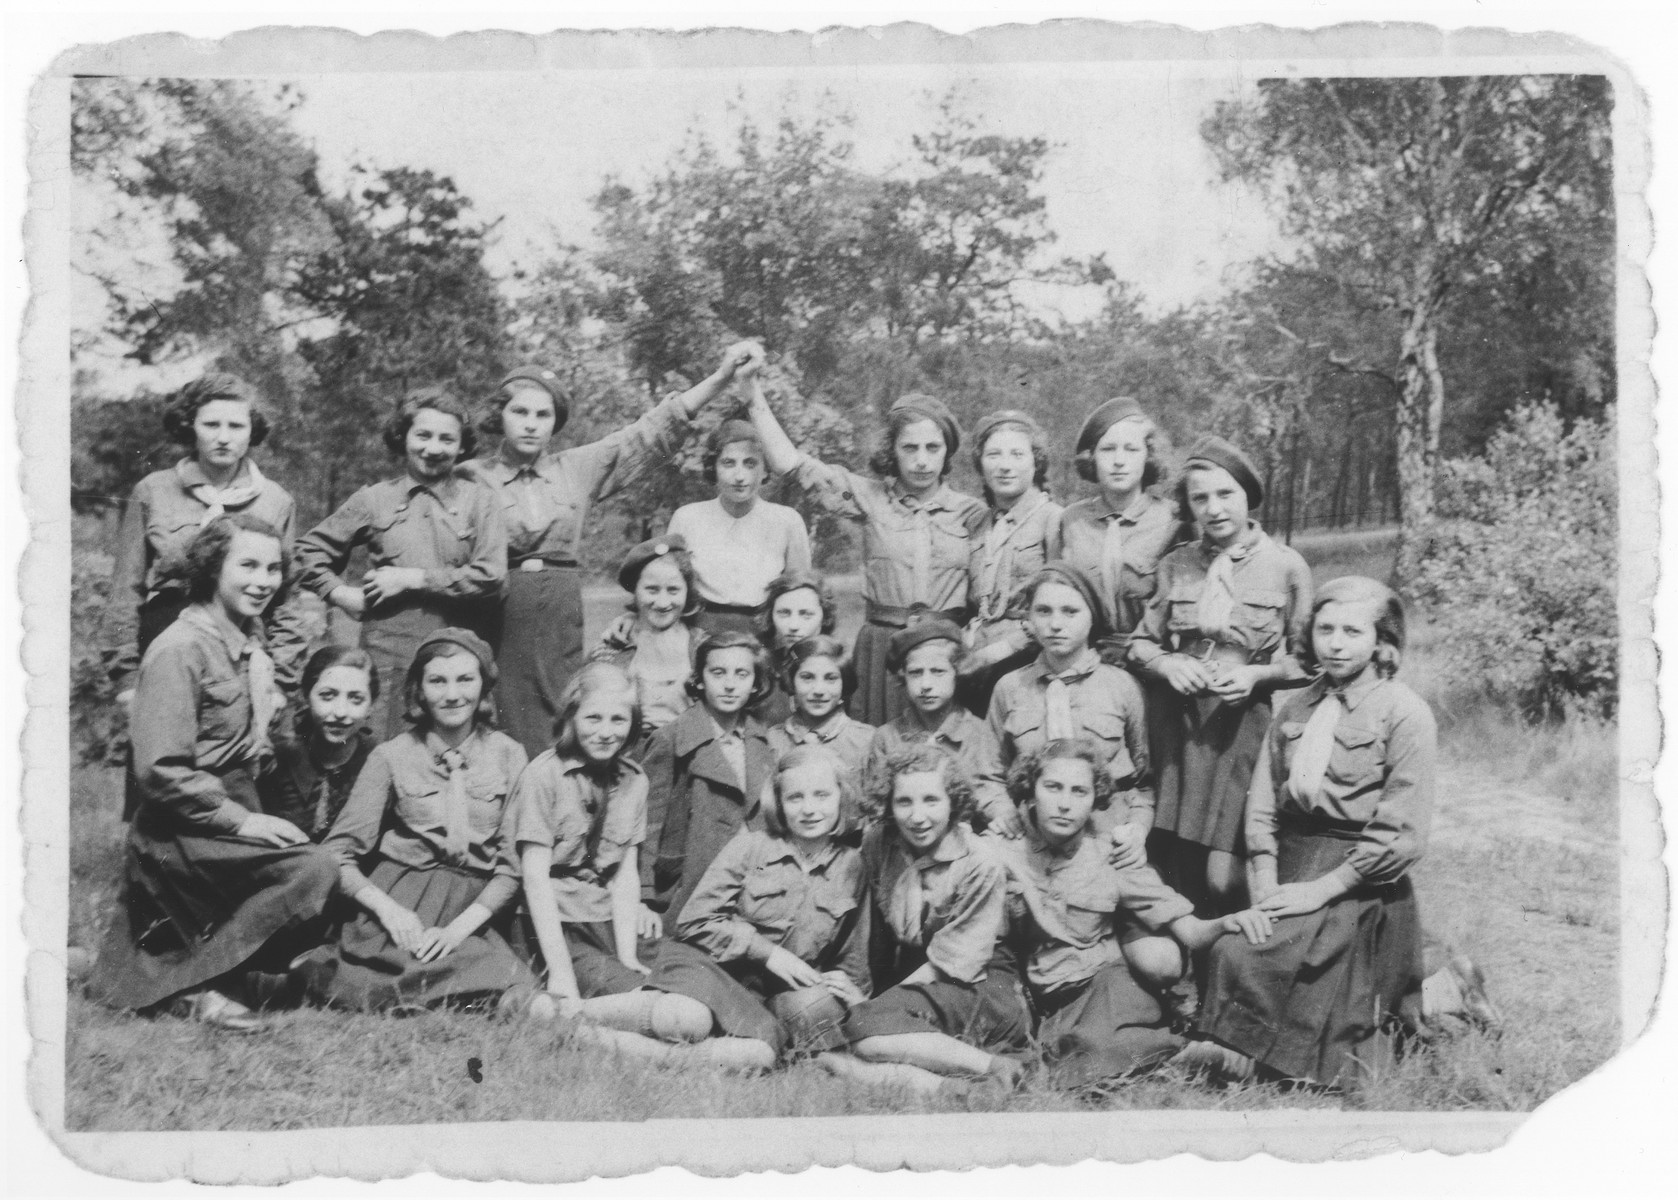 Group portrait of members of a Jewish girl scouting movement on an outing.

Among those pictured are Hela Szpiro, Estusia Fromer, Genia Dunska, Hadassa Cudzynowski, Rozia Feller, and Marisza Stibelman.